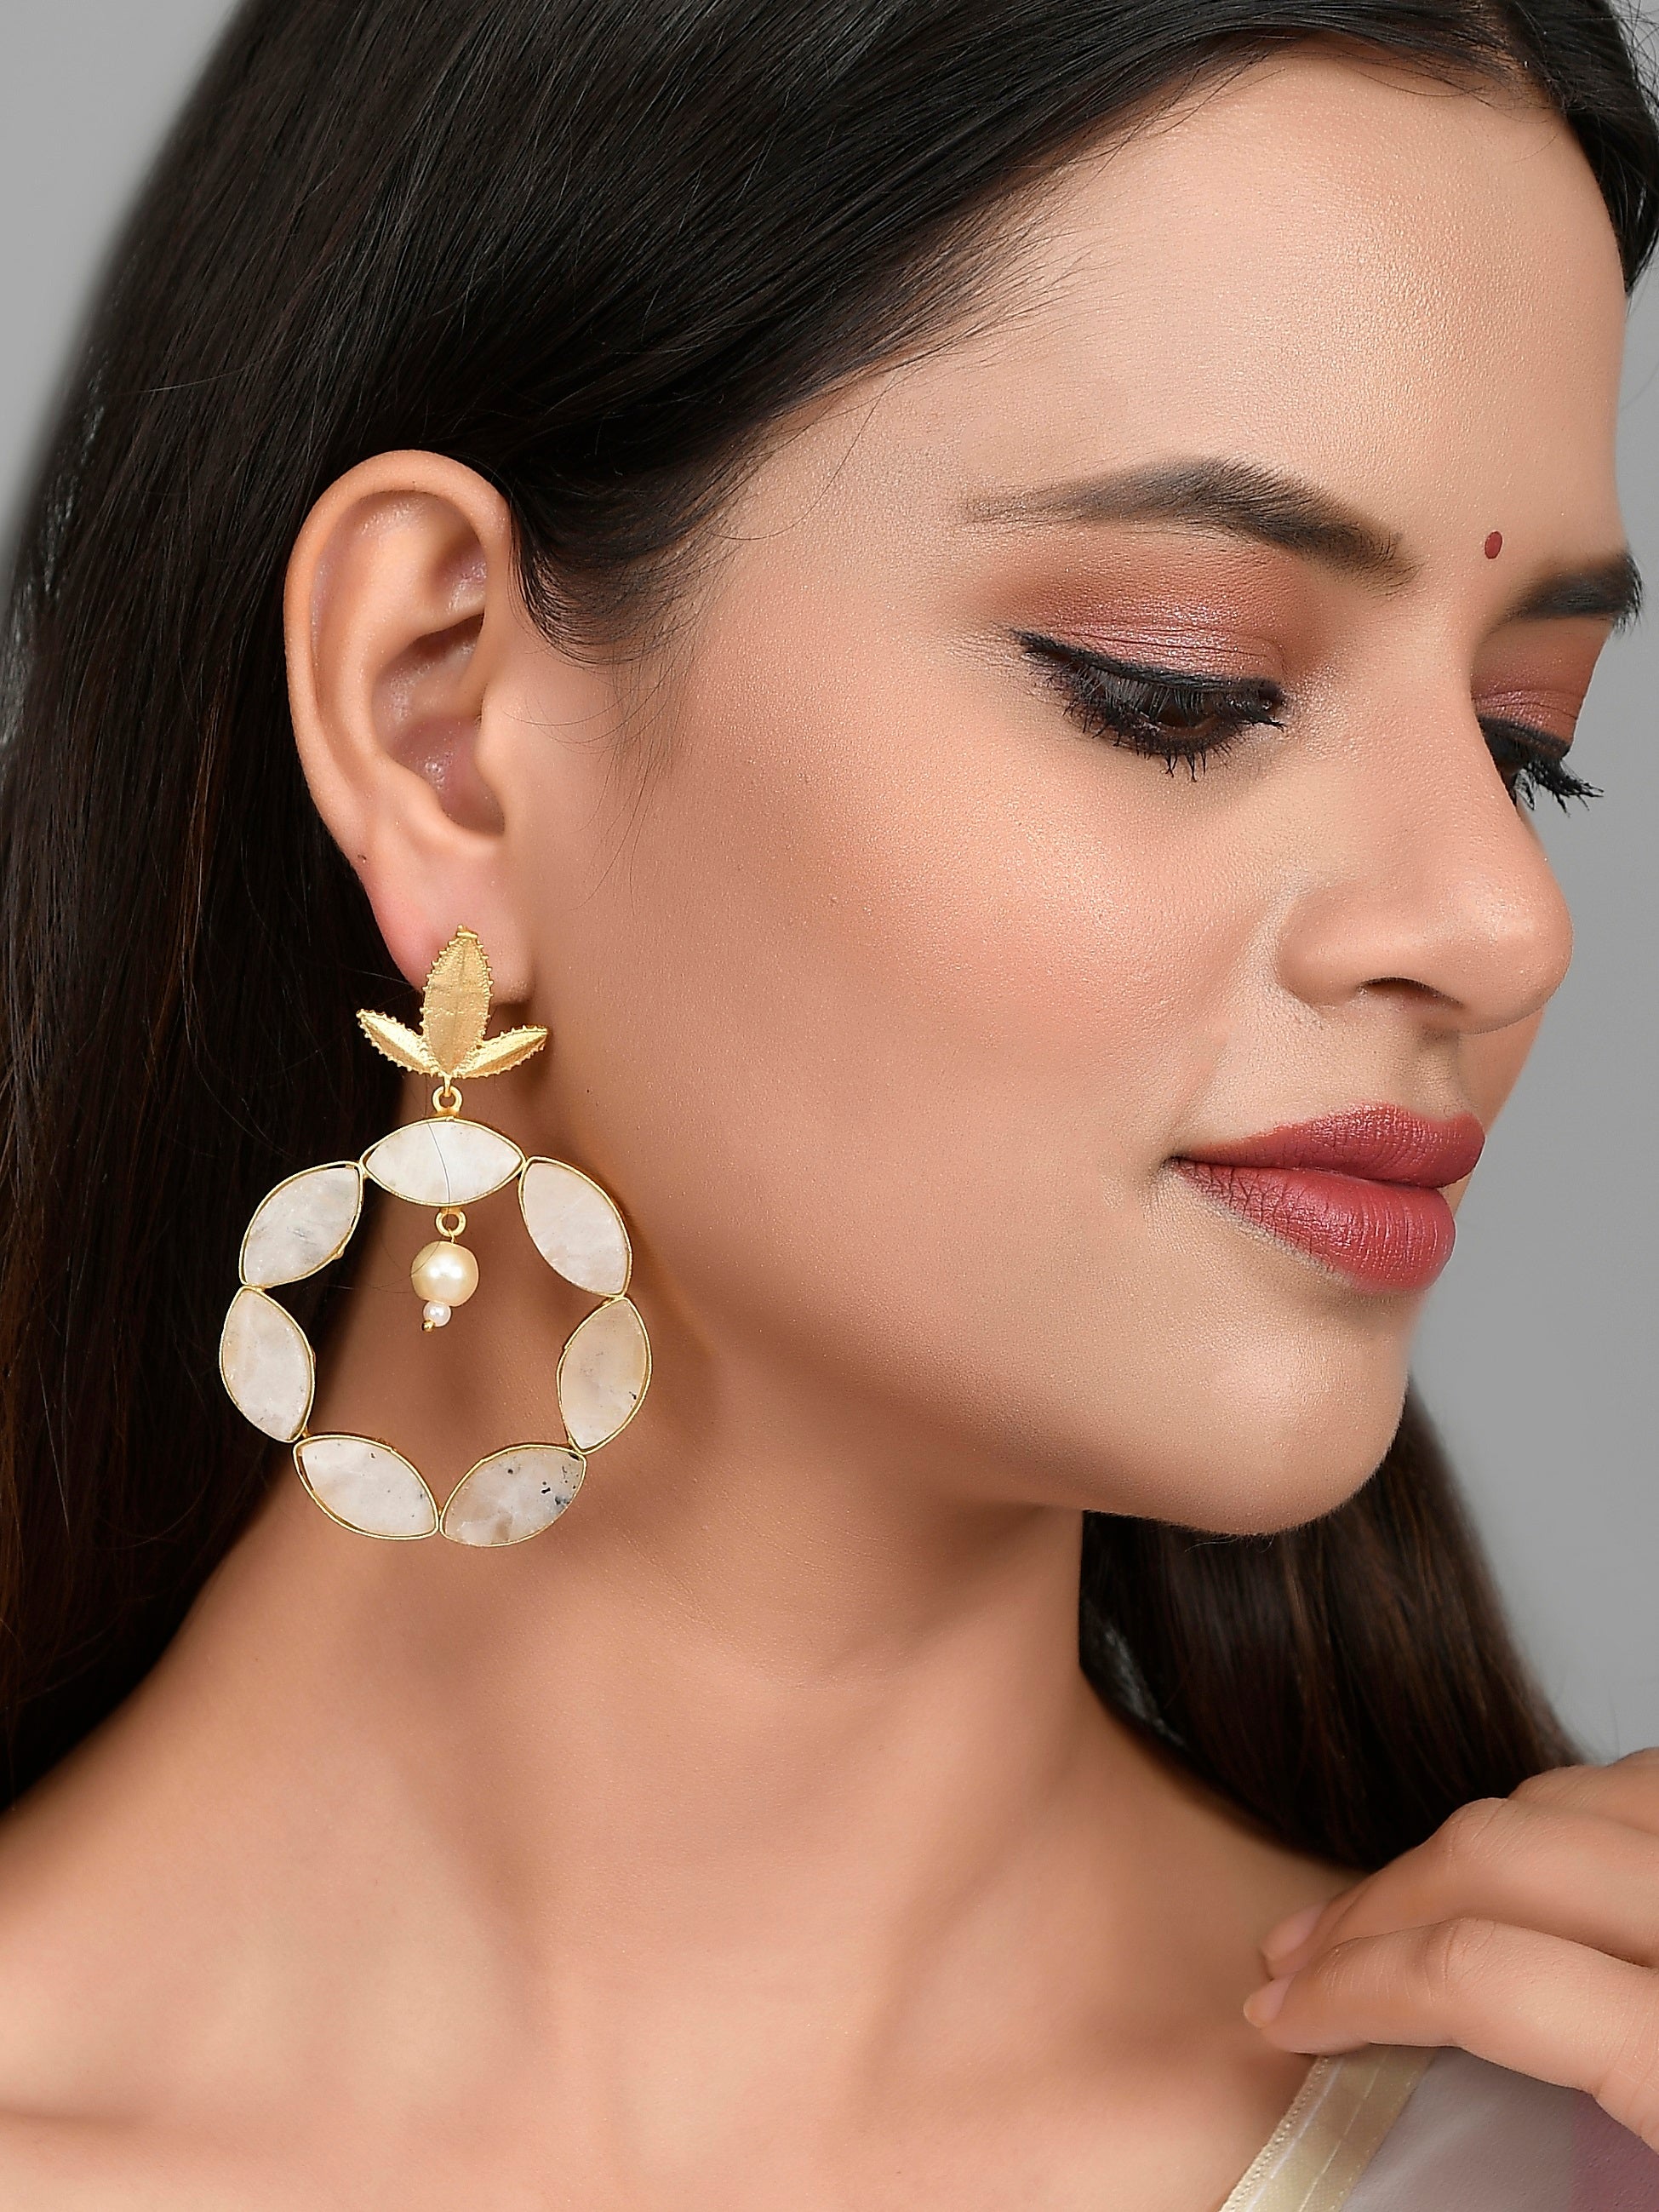 Yak Coin Earrings – Adornment + Theory